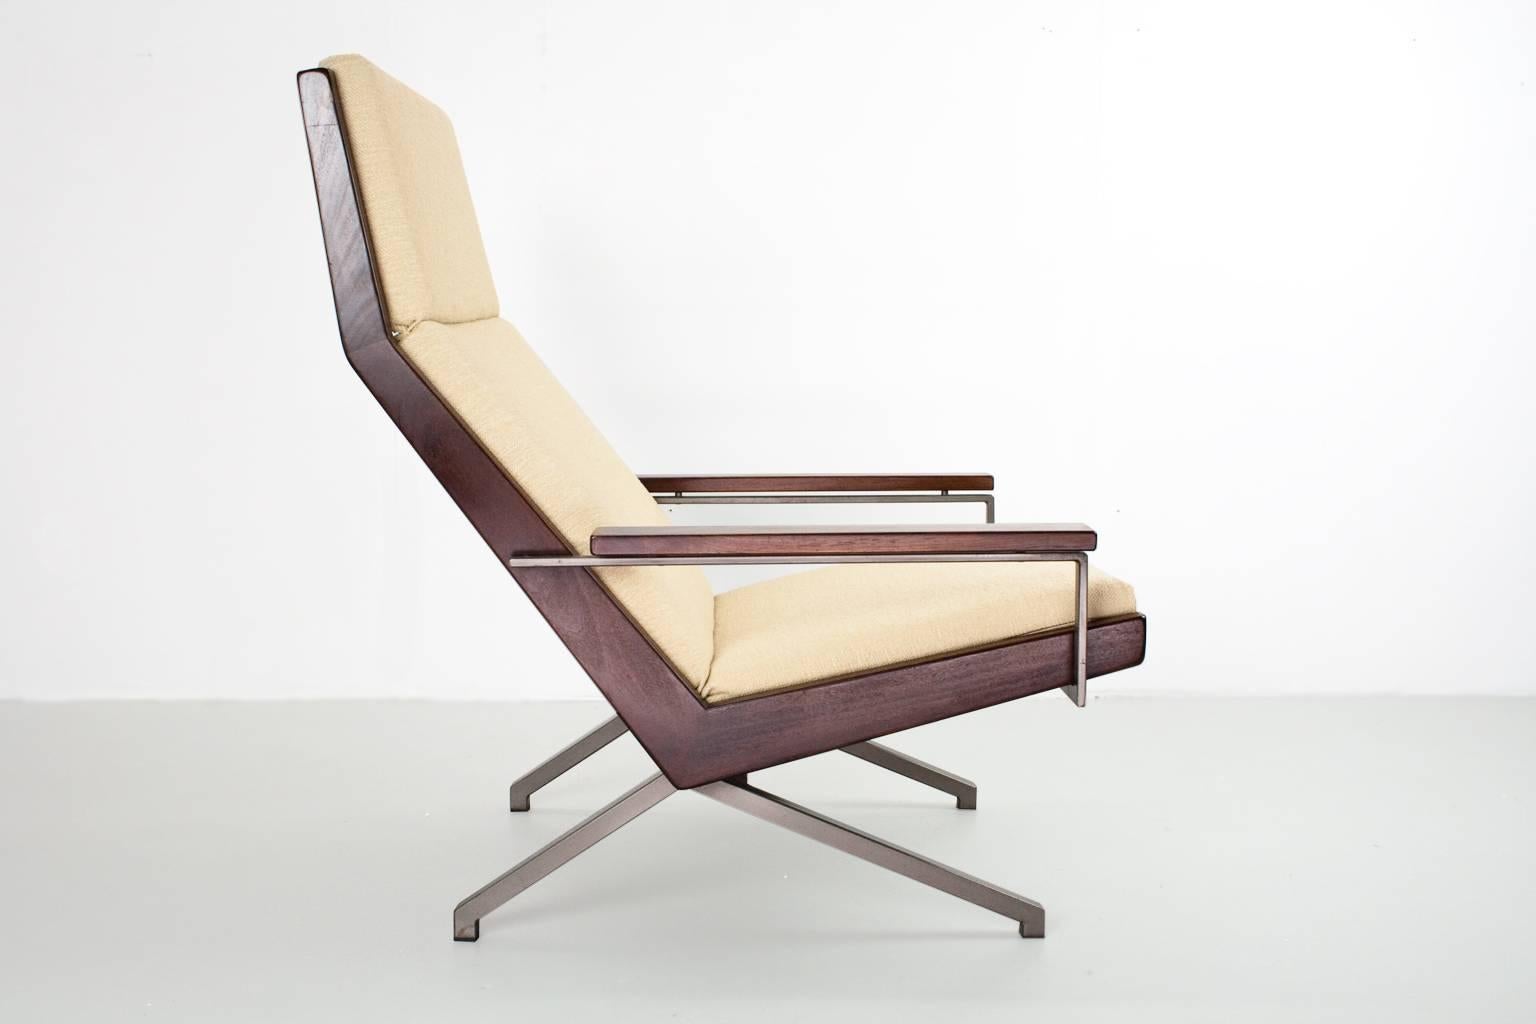 Lacquered Lounge Chair Model Lotus by Dutch Industrial Designer Rob Parry, 1960s, Holland